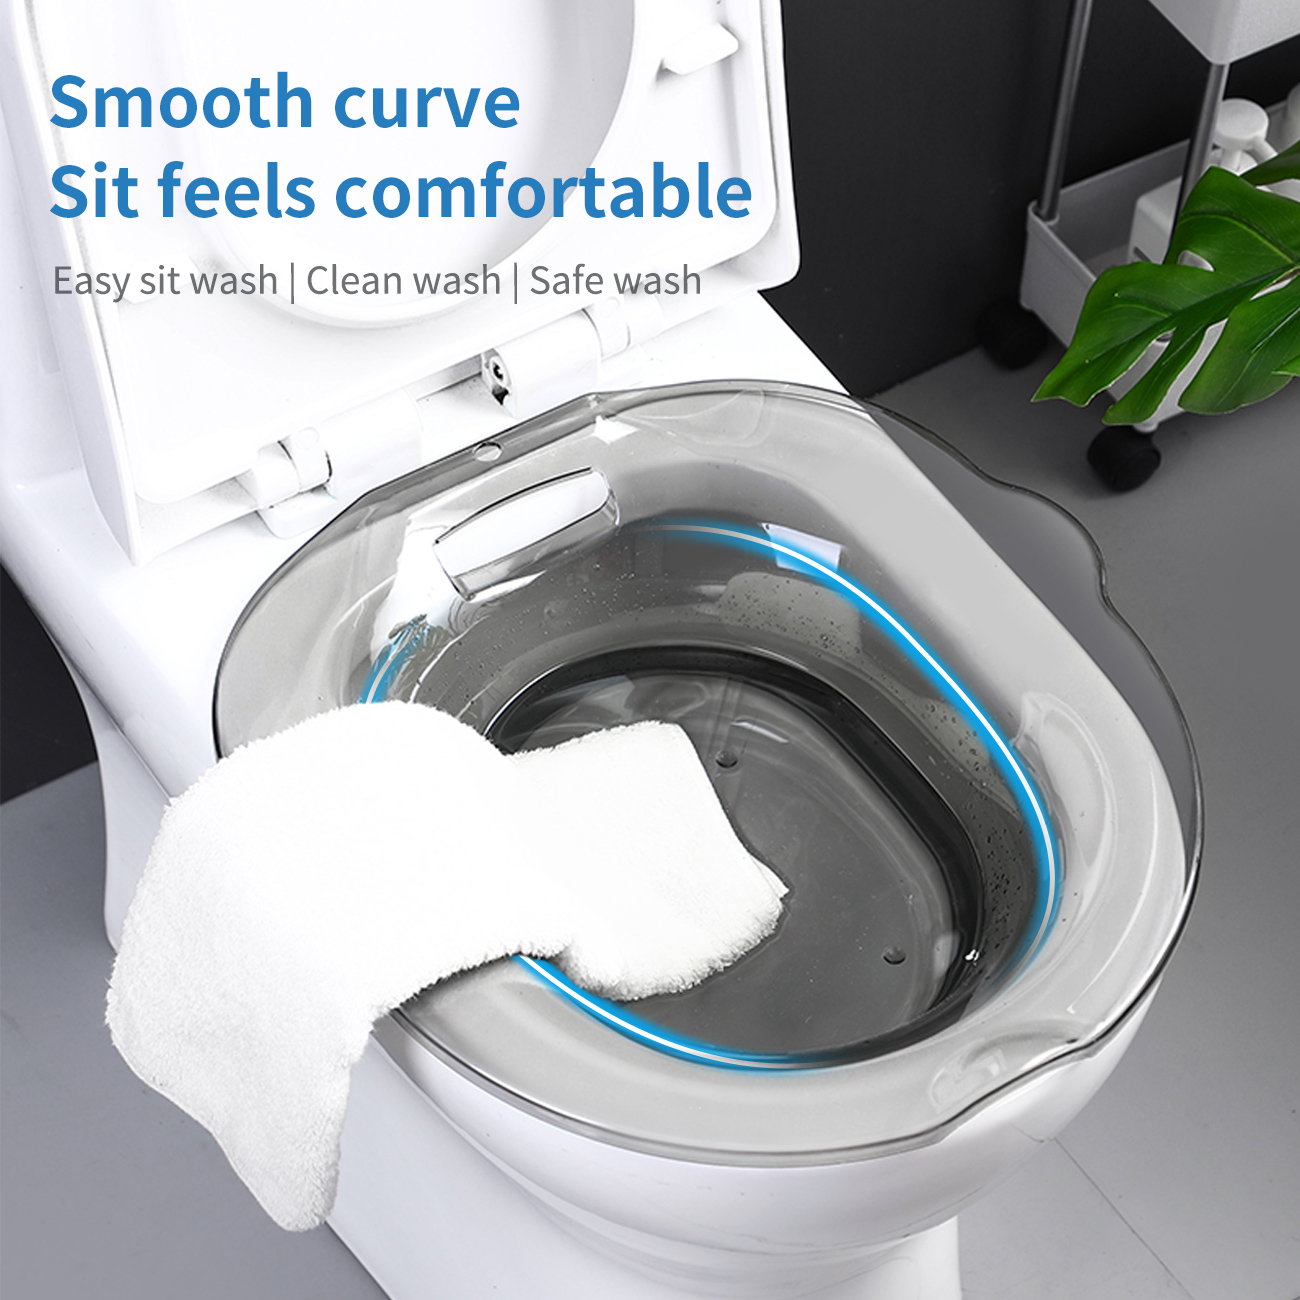 Shepherd Large Capacity Heat-Resistant Load-Bearing No Squat Bidet Applicable for All Toilets